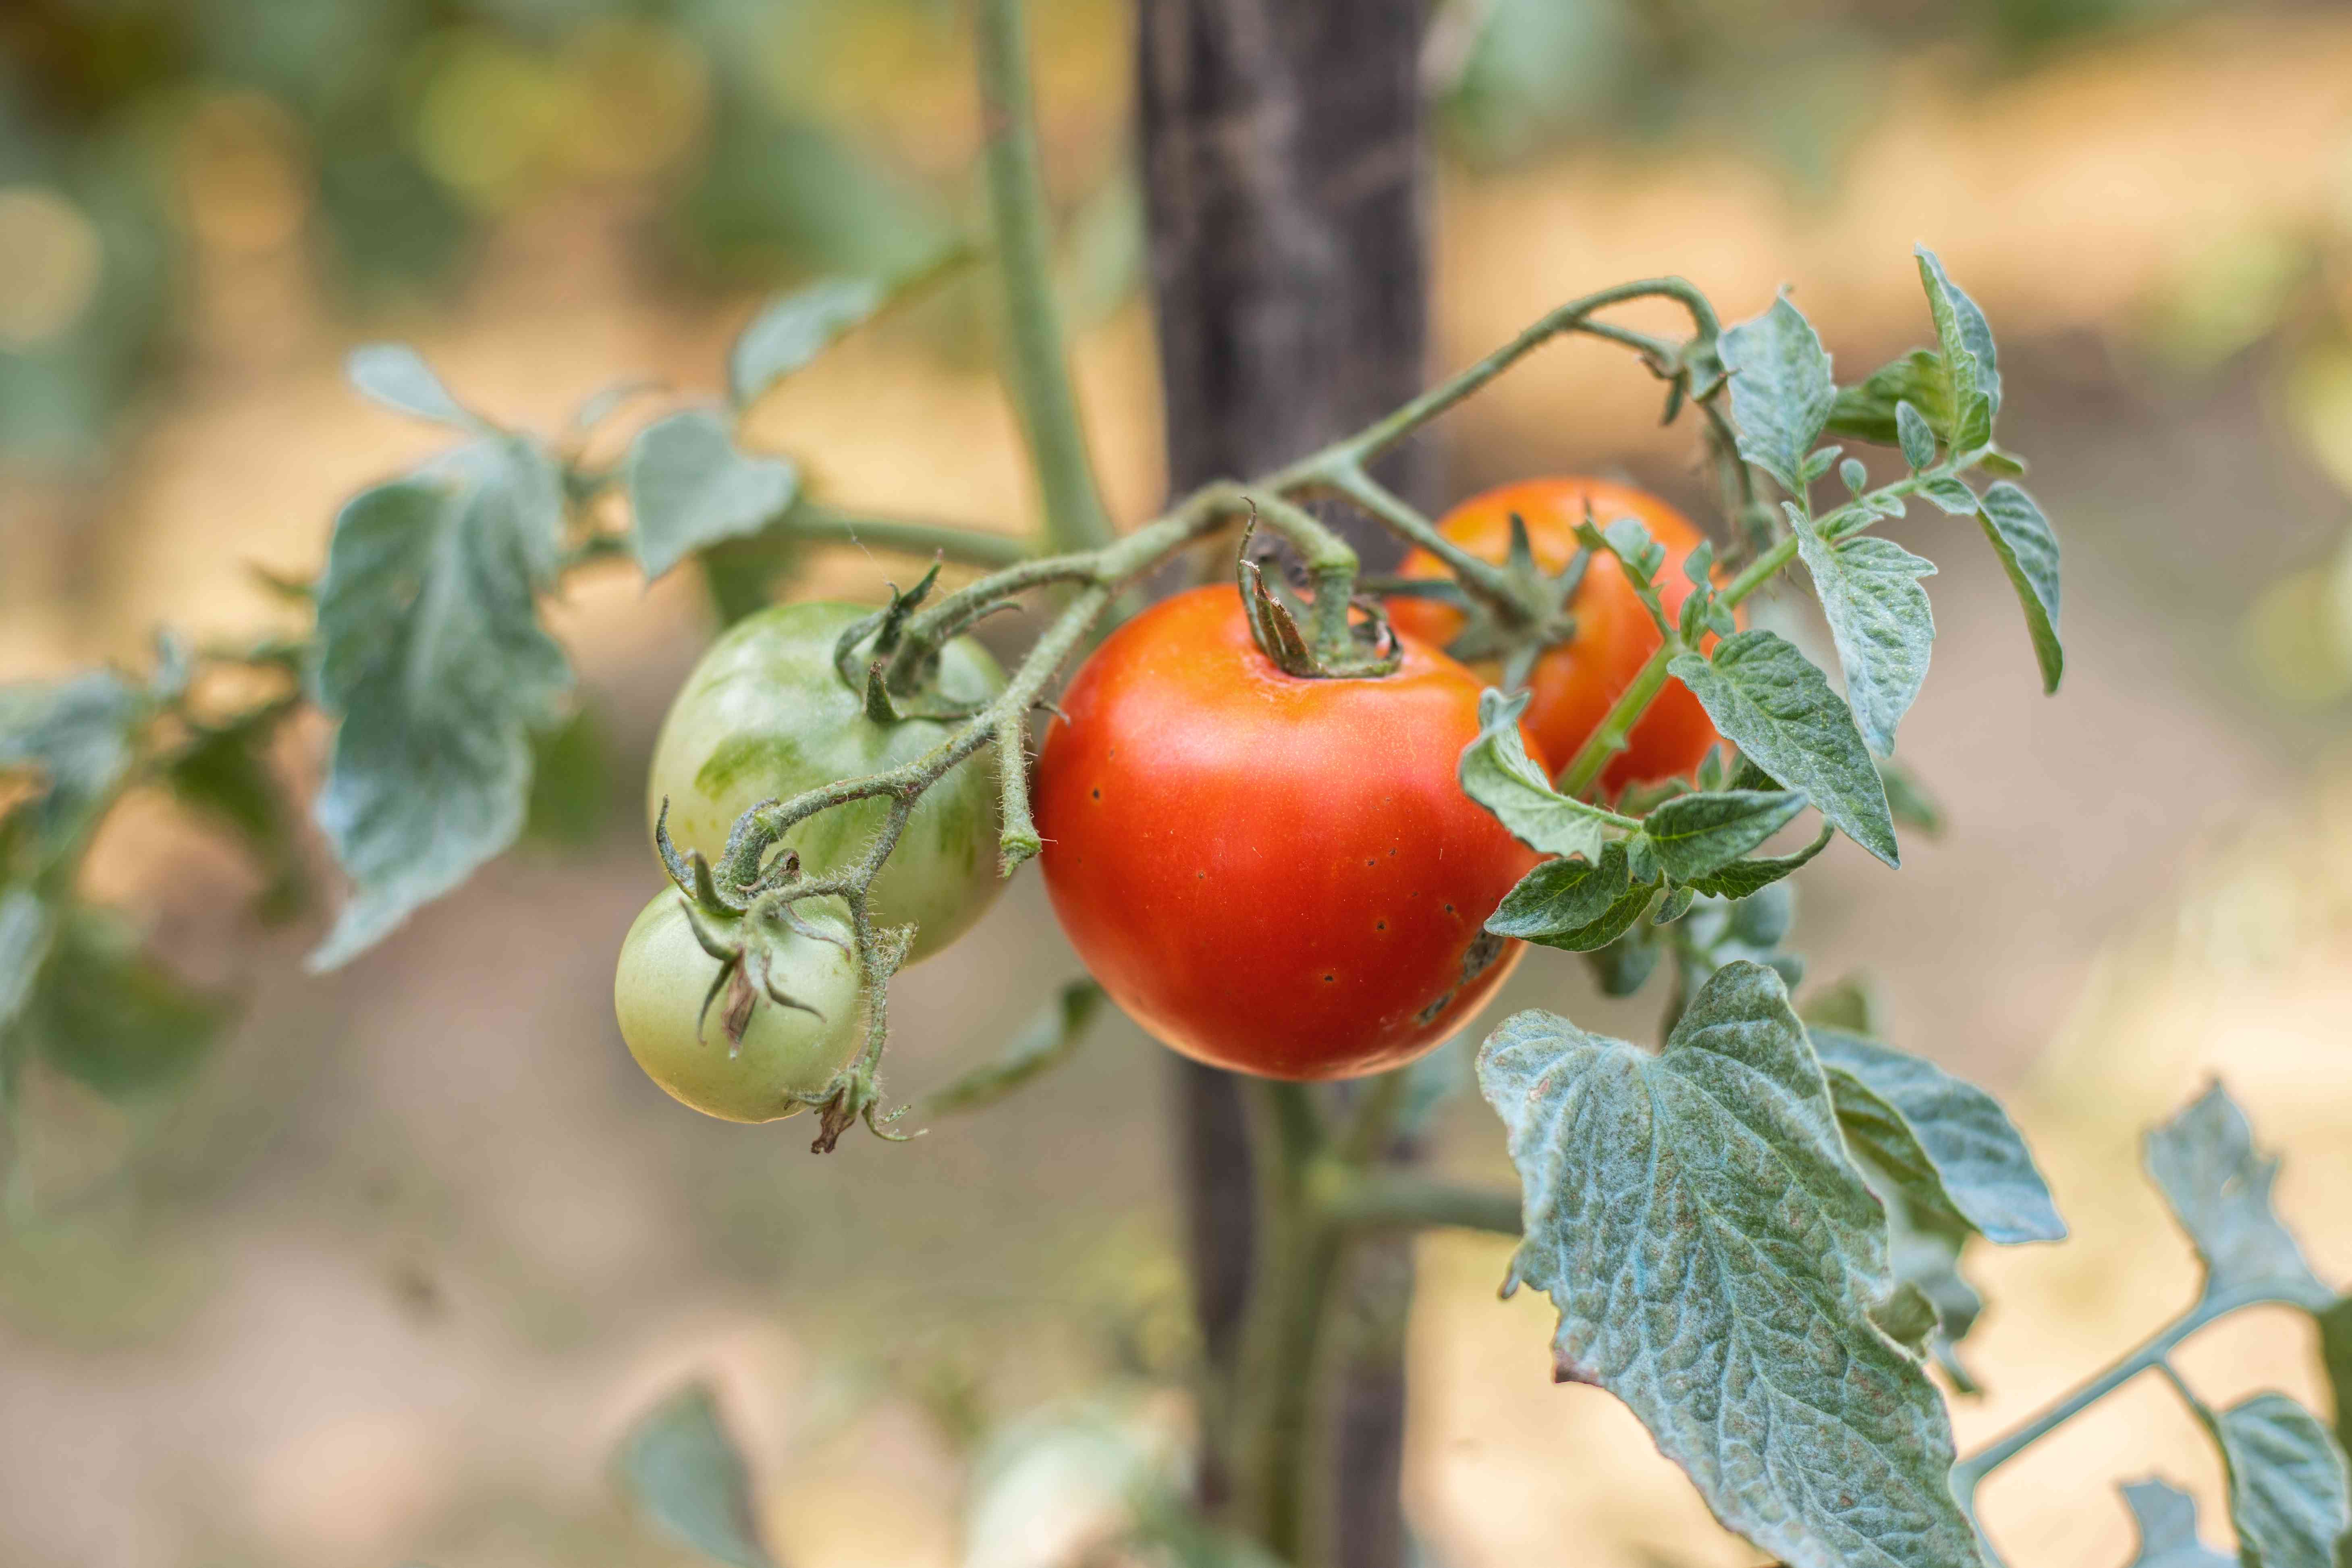 close view of multiple tomatoes growing on vine, some red some green